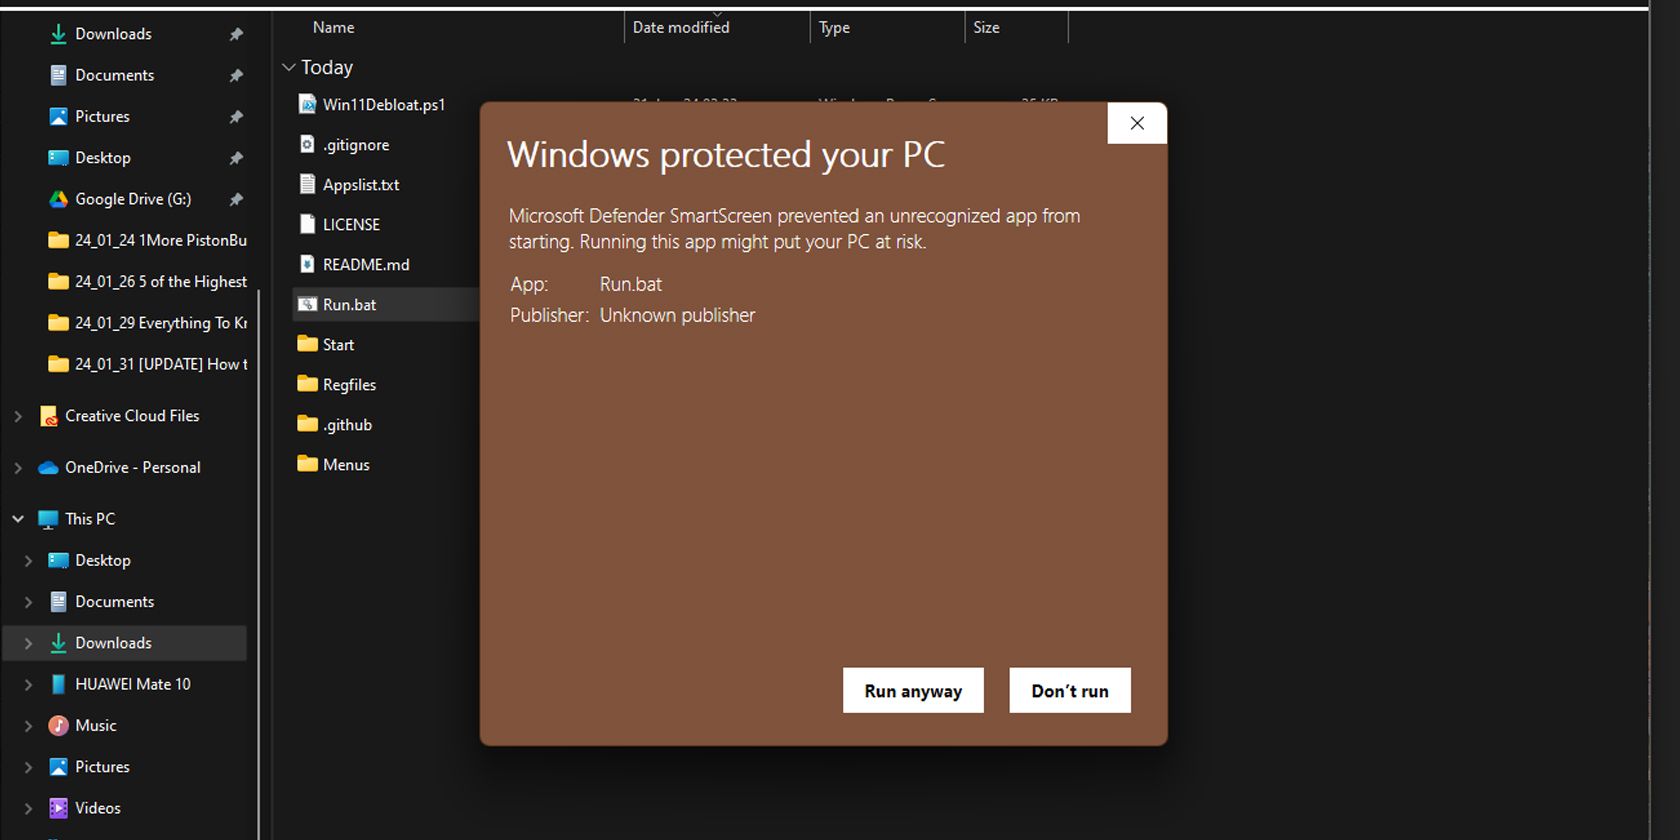 Windows Protected Your PC pop up